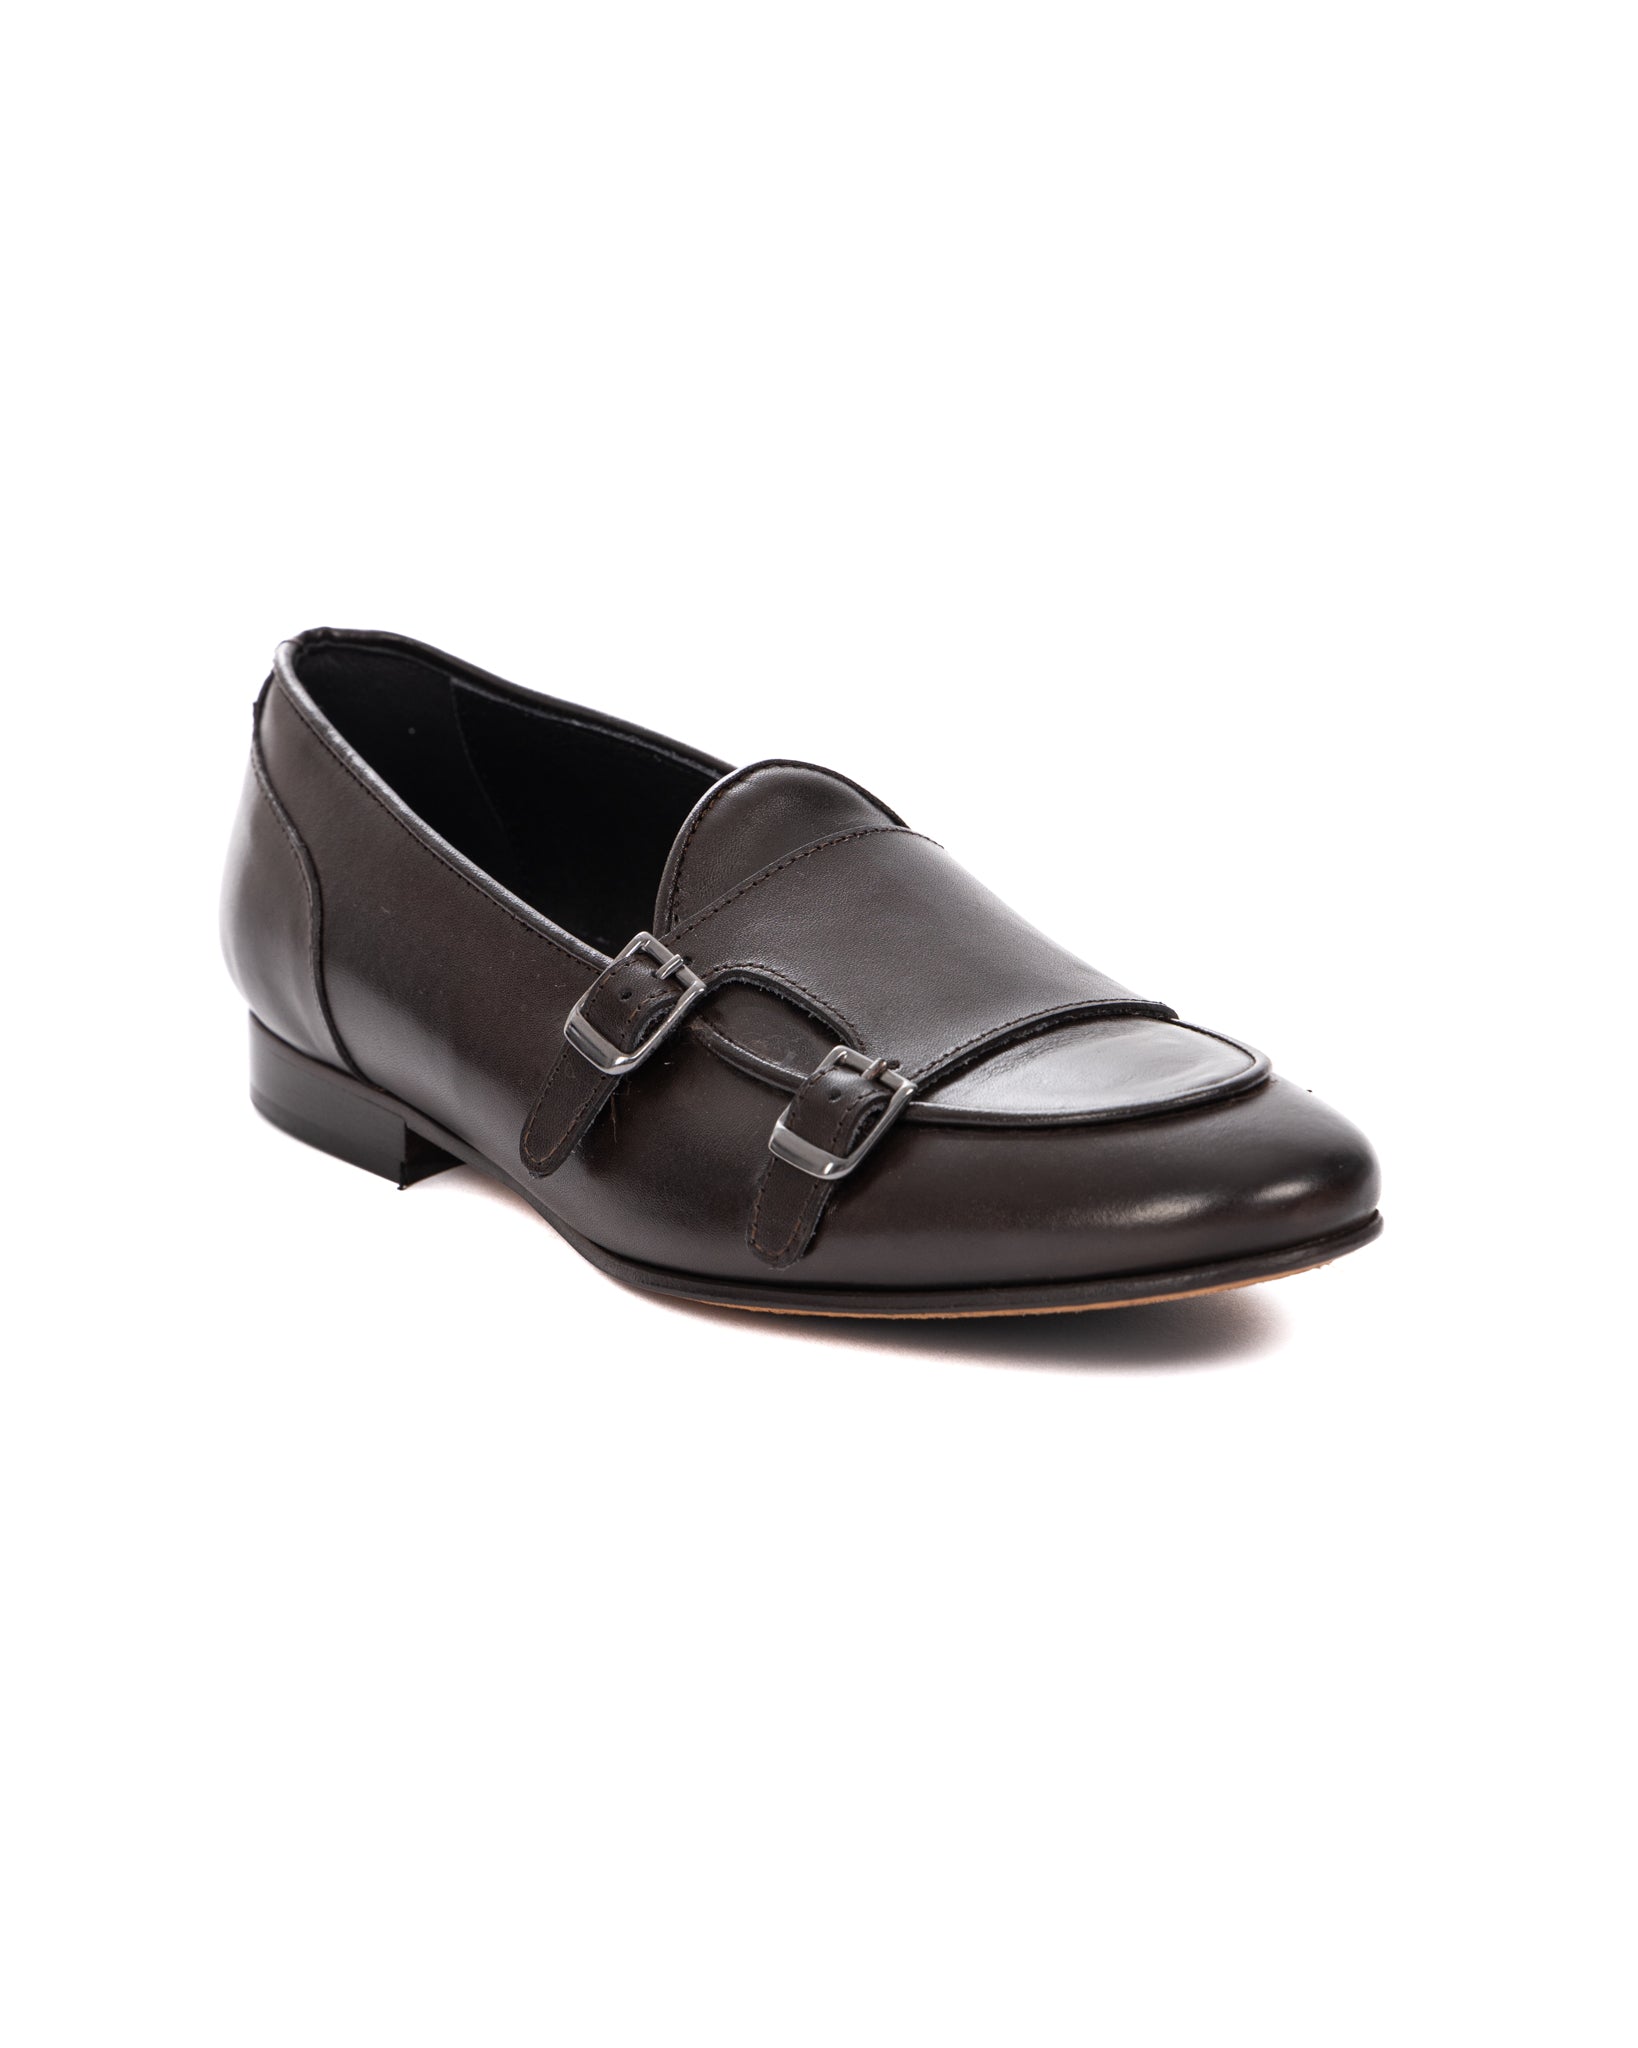 Gianni - dark brown moccasin with double buckle